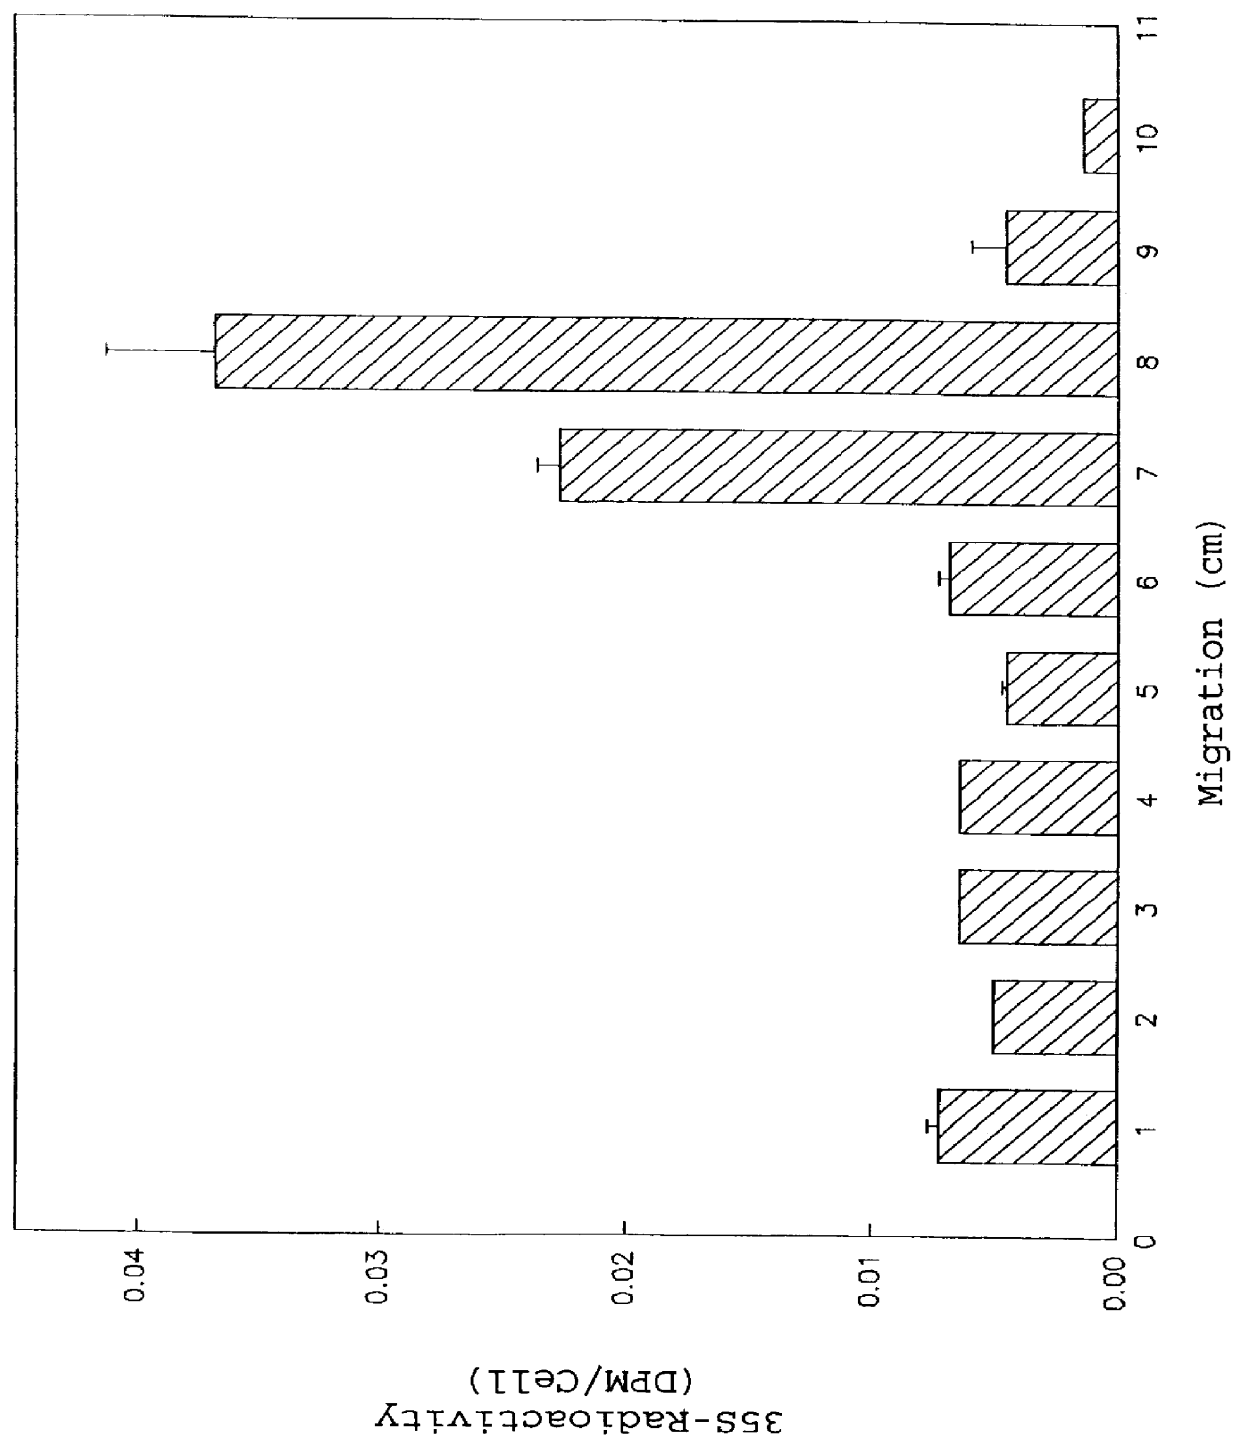 Method and pharmaceutical composition for chondrostimulation with a prostaglandin (e.g. misoprostol) and TGF- beta , optionally in combination with IGF-1